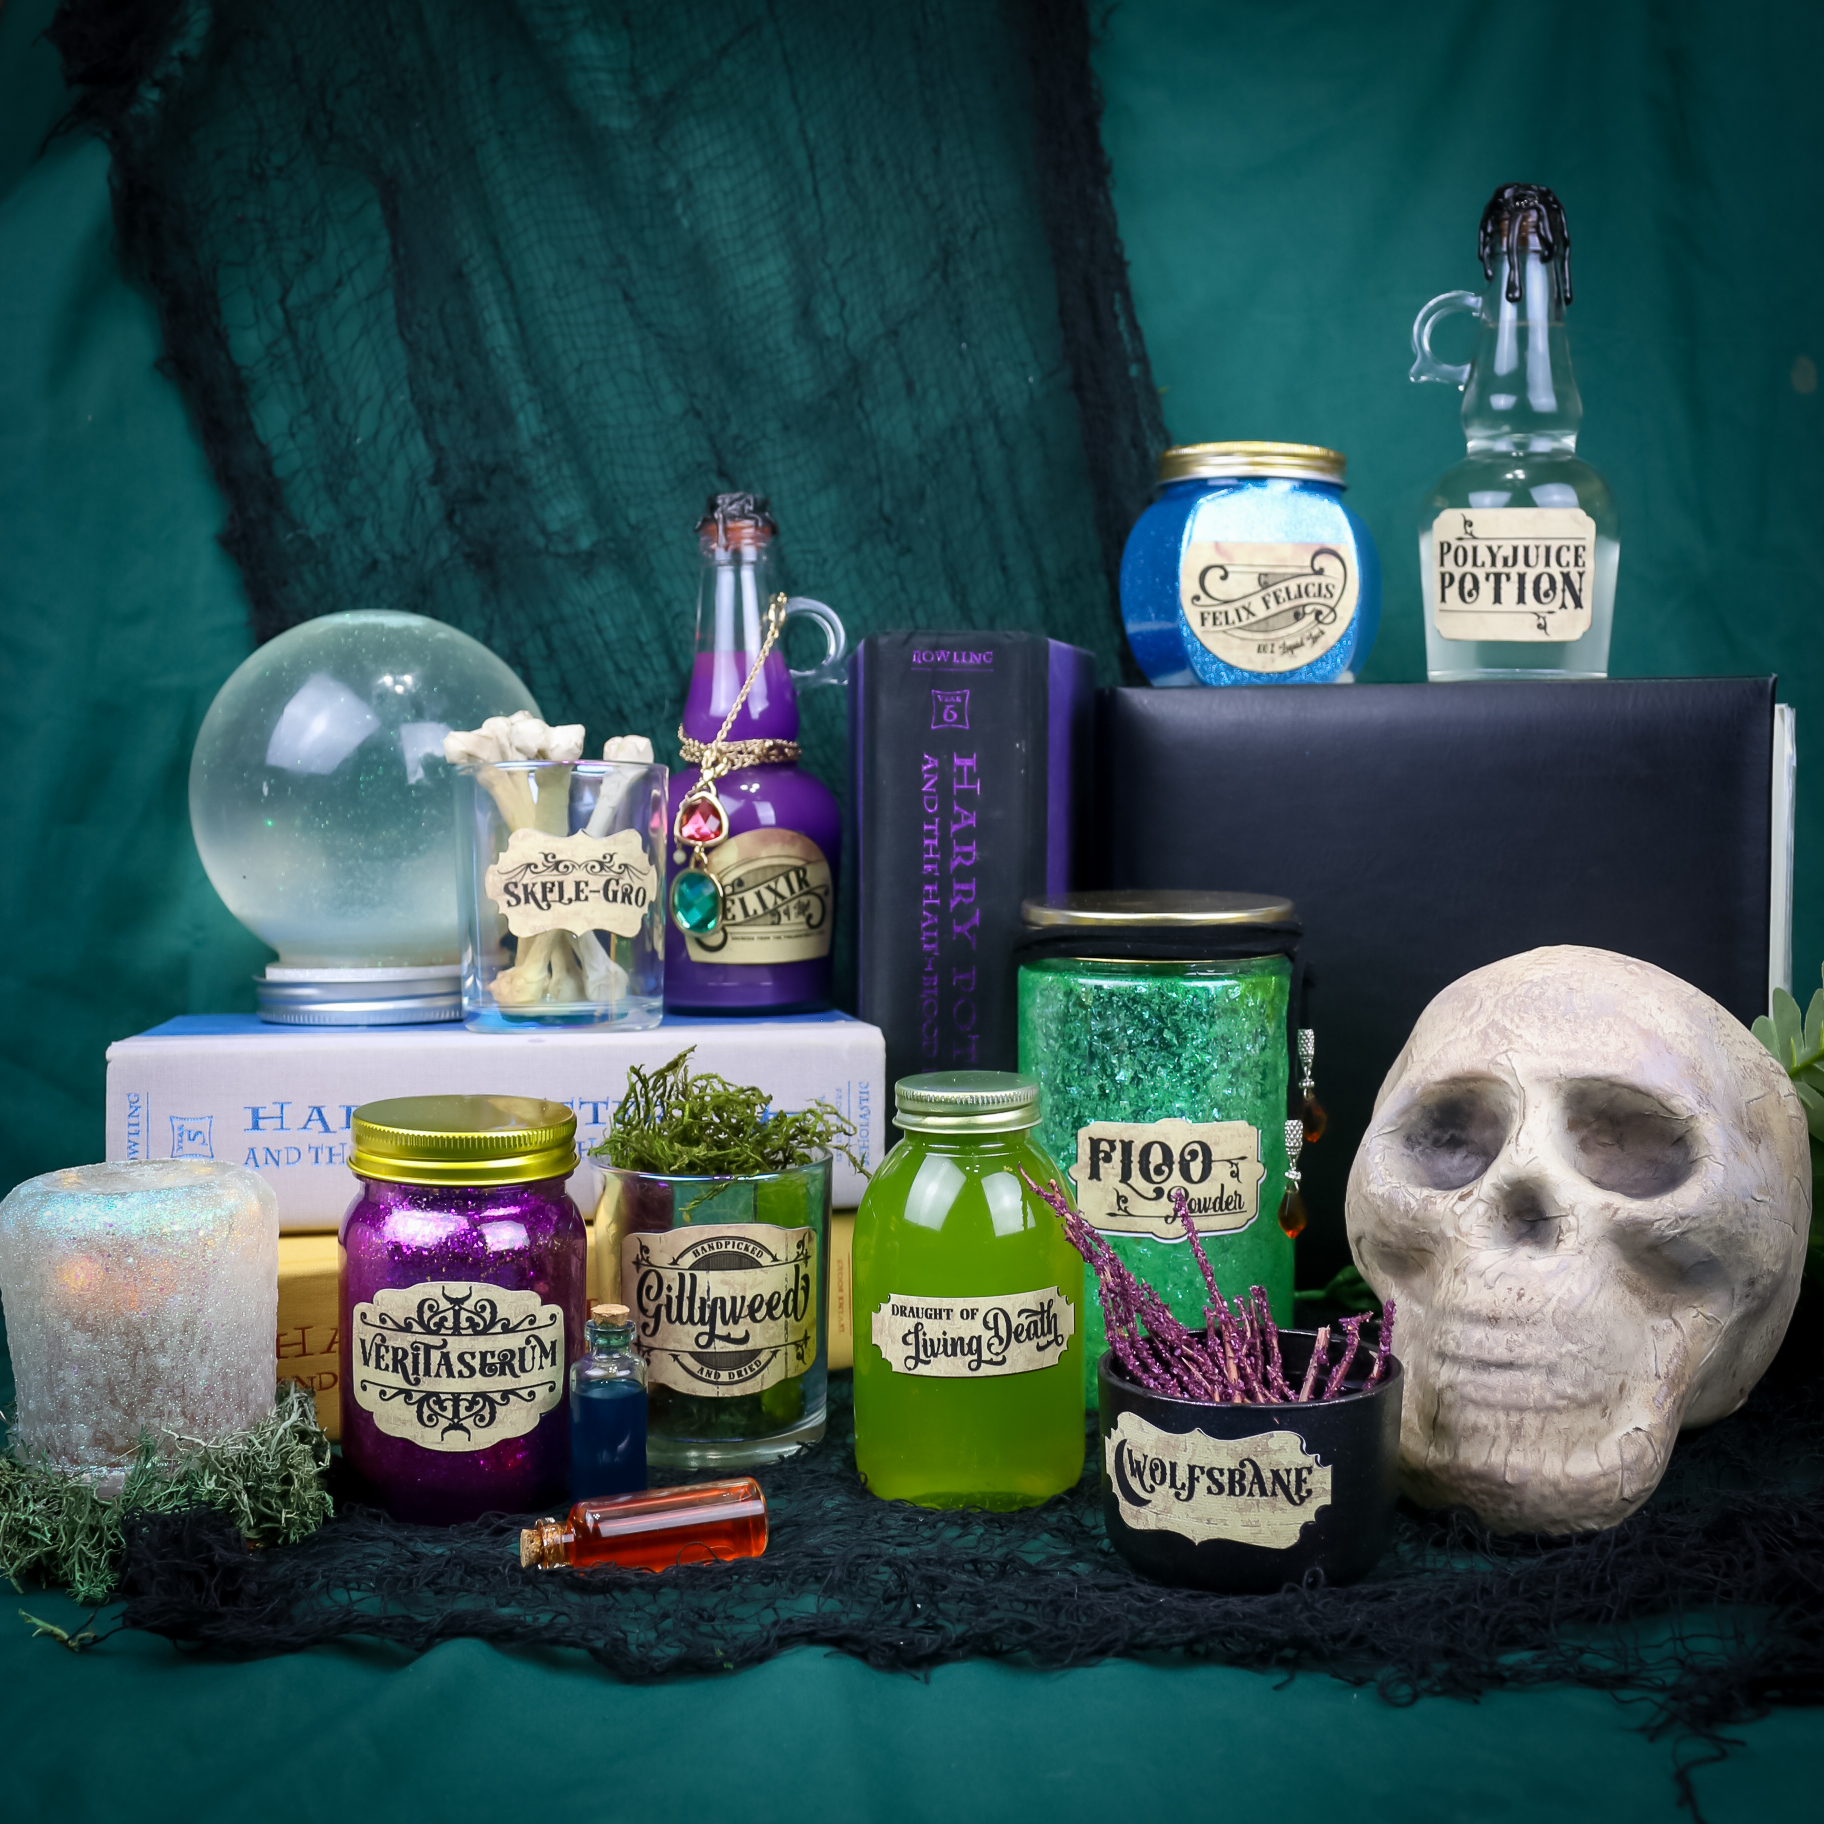 Harry Potter potion labels in a display with magical items